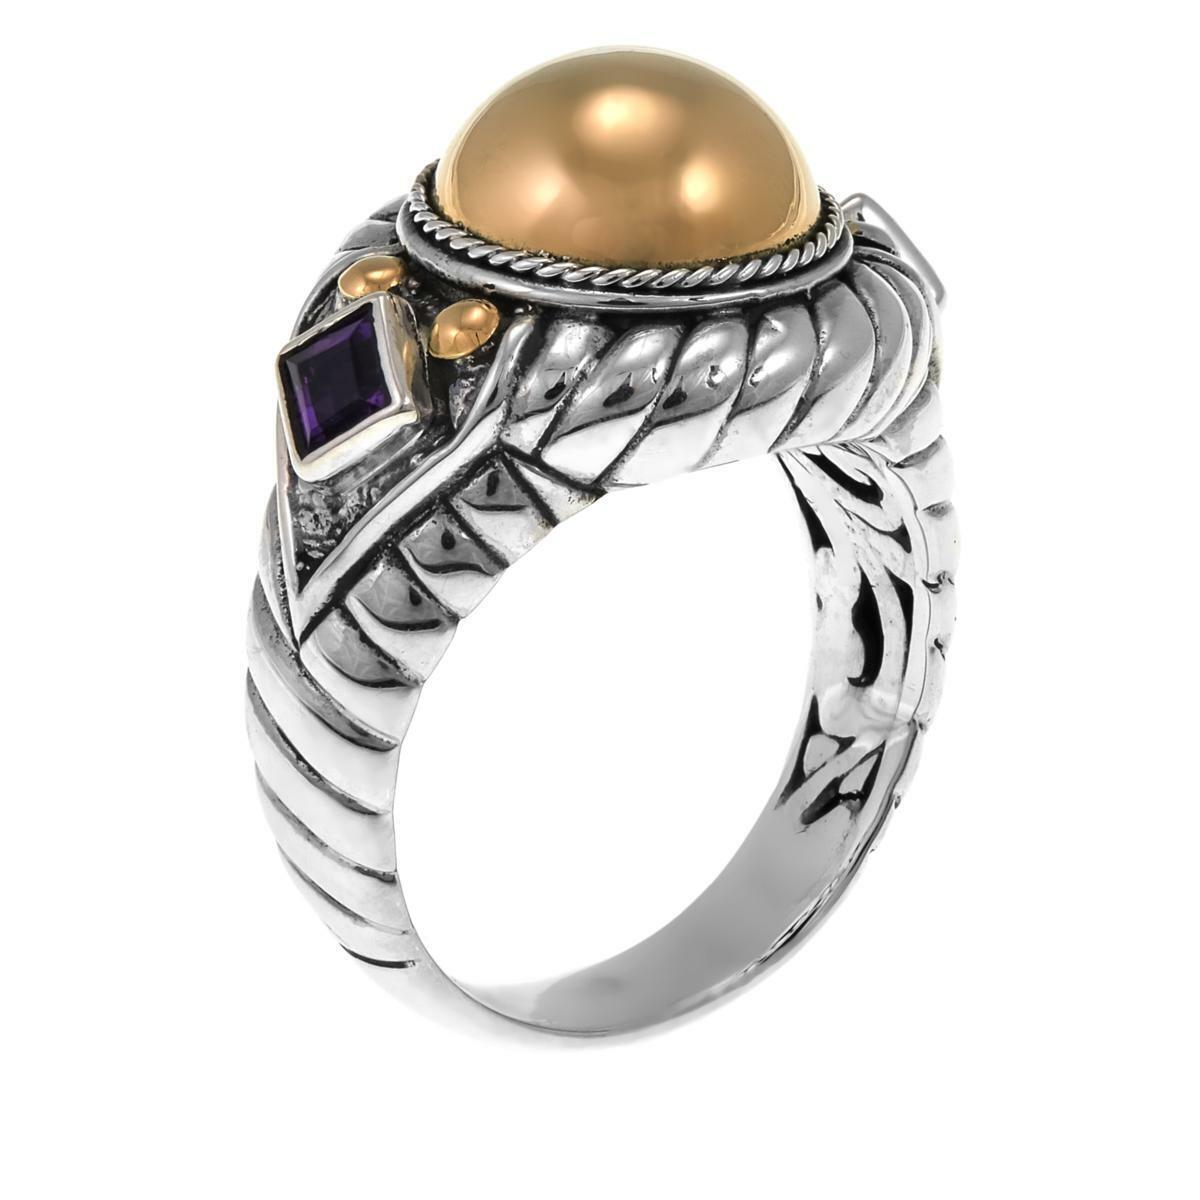 Bali Designs 2-Tone 0.22Ctw Amethyst Cable-Twist Ring Size 8 Hsn $221